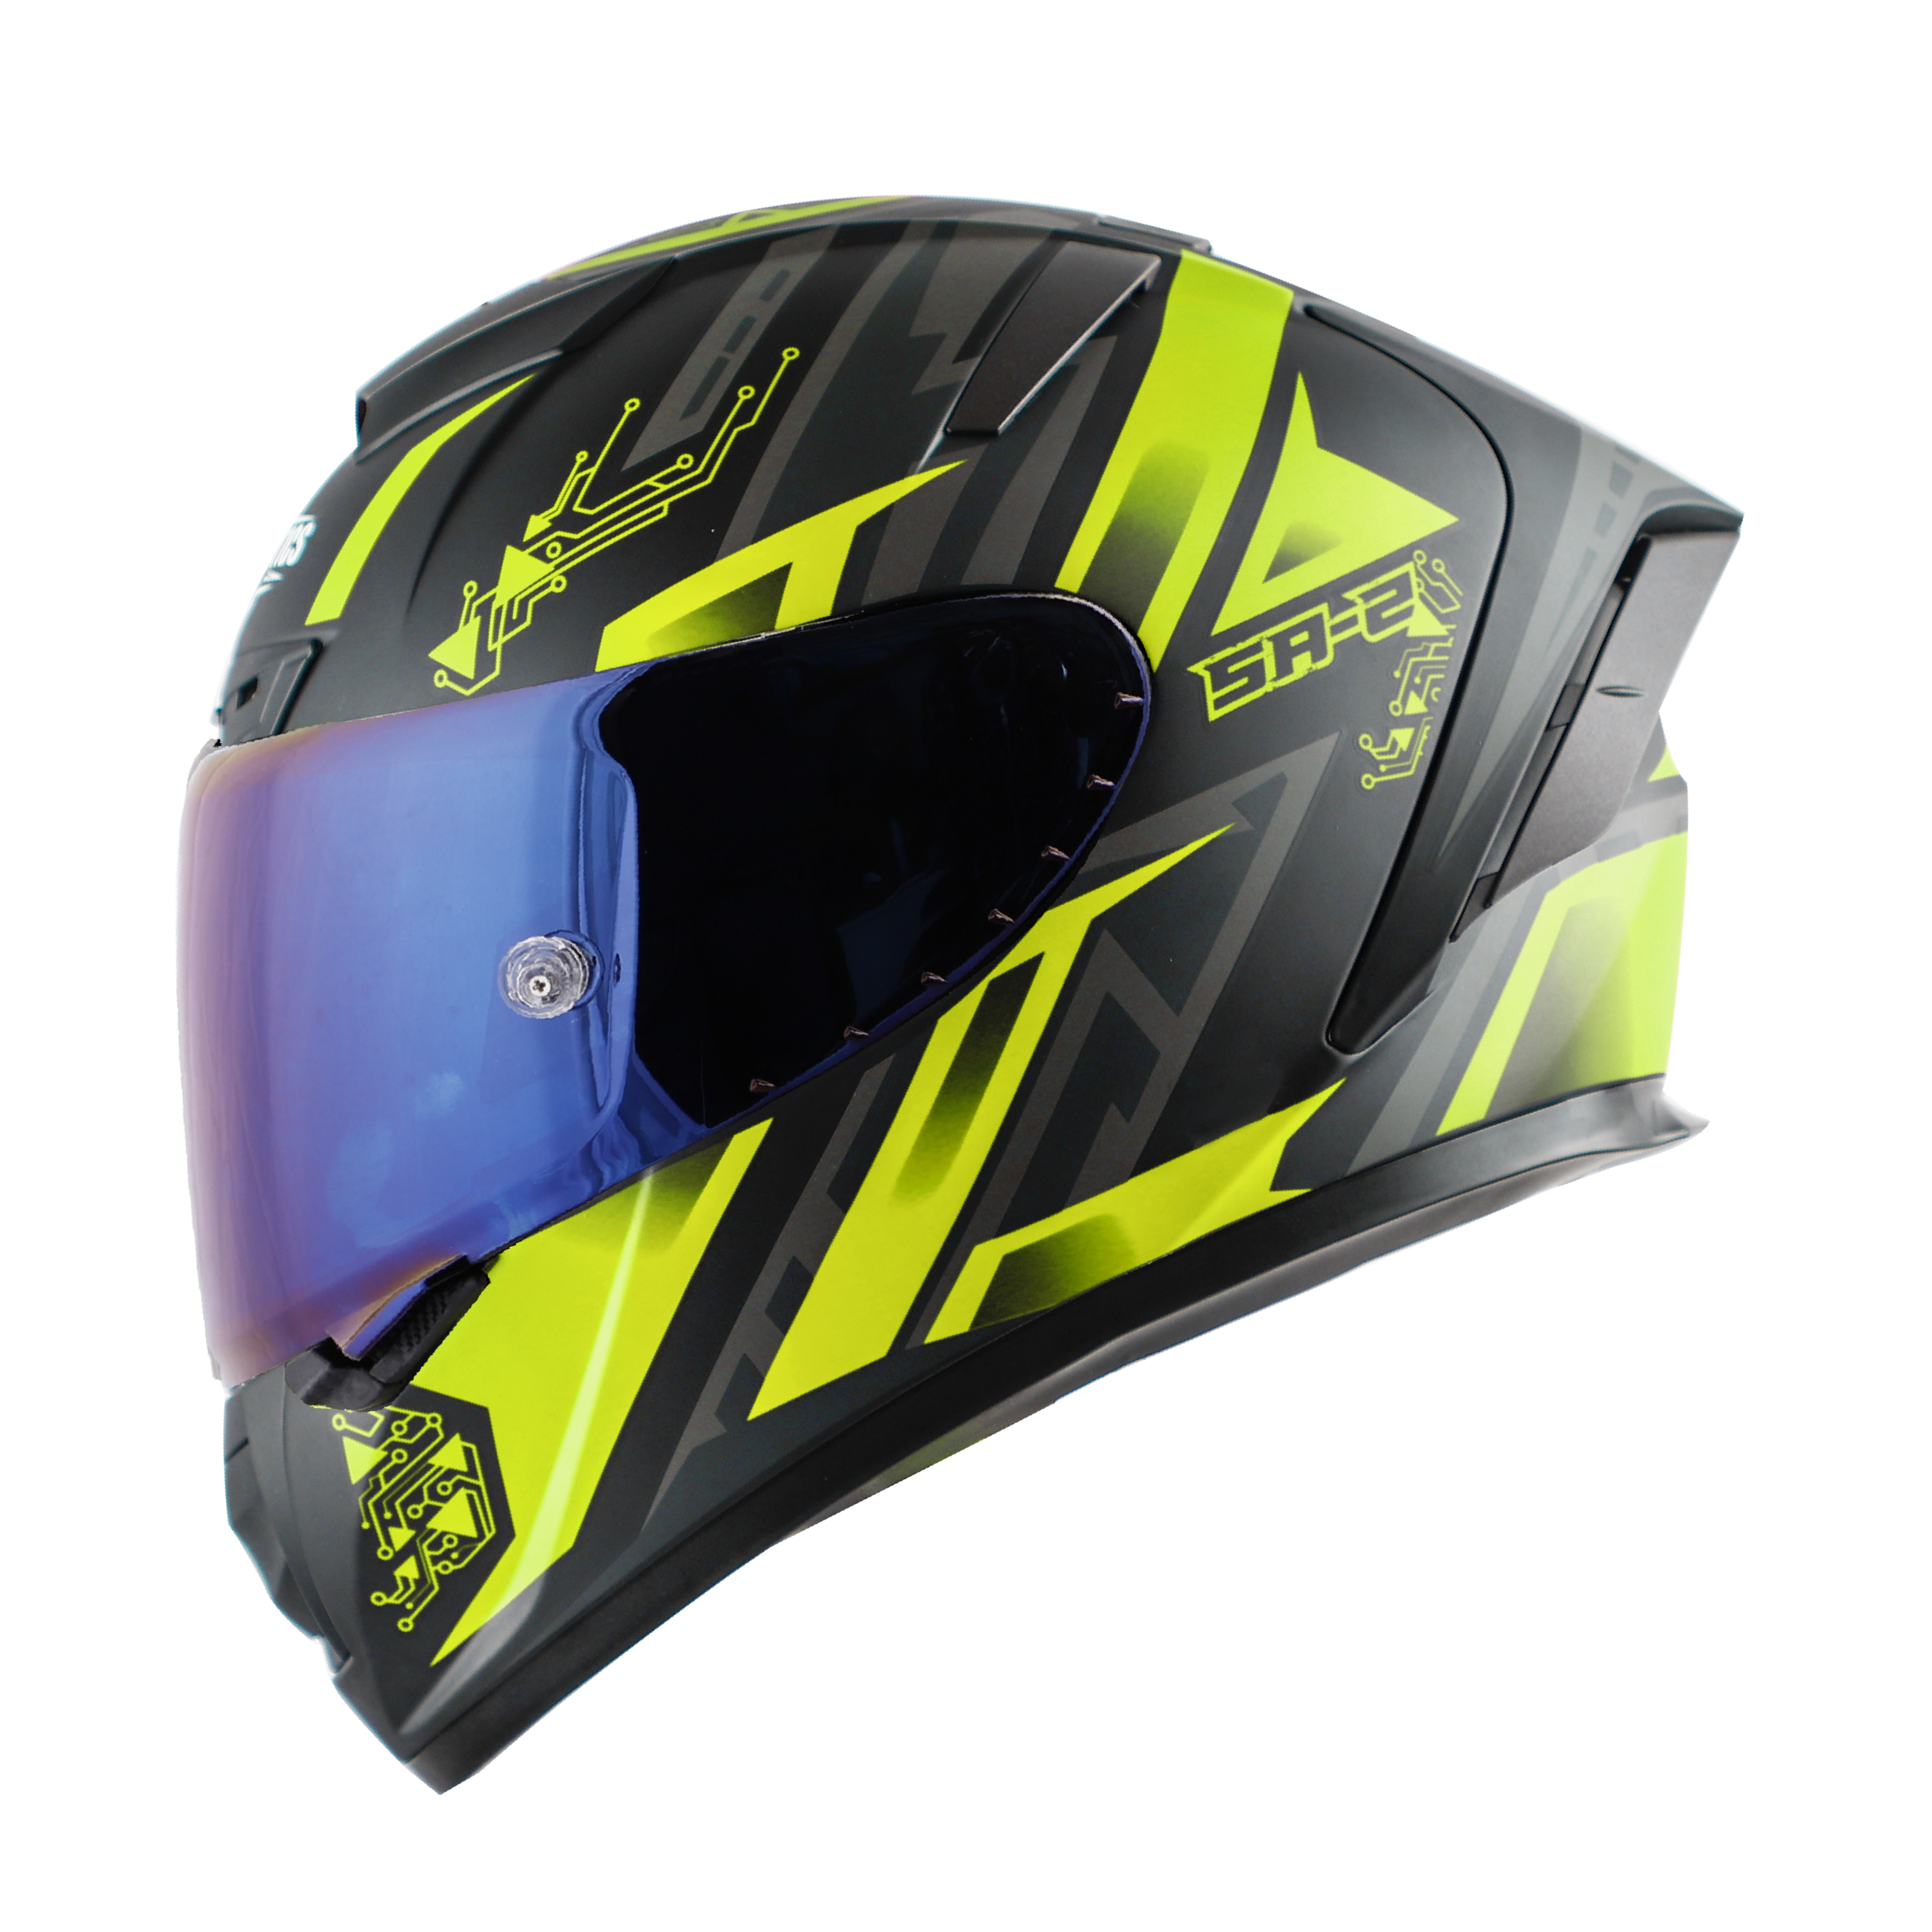 SA-2 ELECTRIC GLOSSY BLACK WITH NEON (FITTED WITH CLEAR VISOR EXTRA BLUE CHROME VISOR FREE WITH ANTI-FOG SHIELD HOLDER)